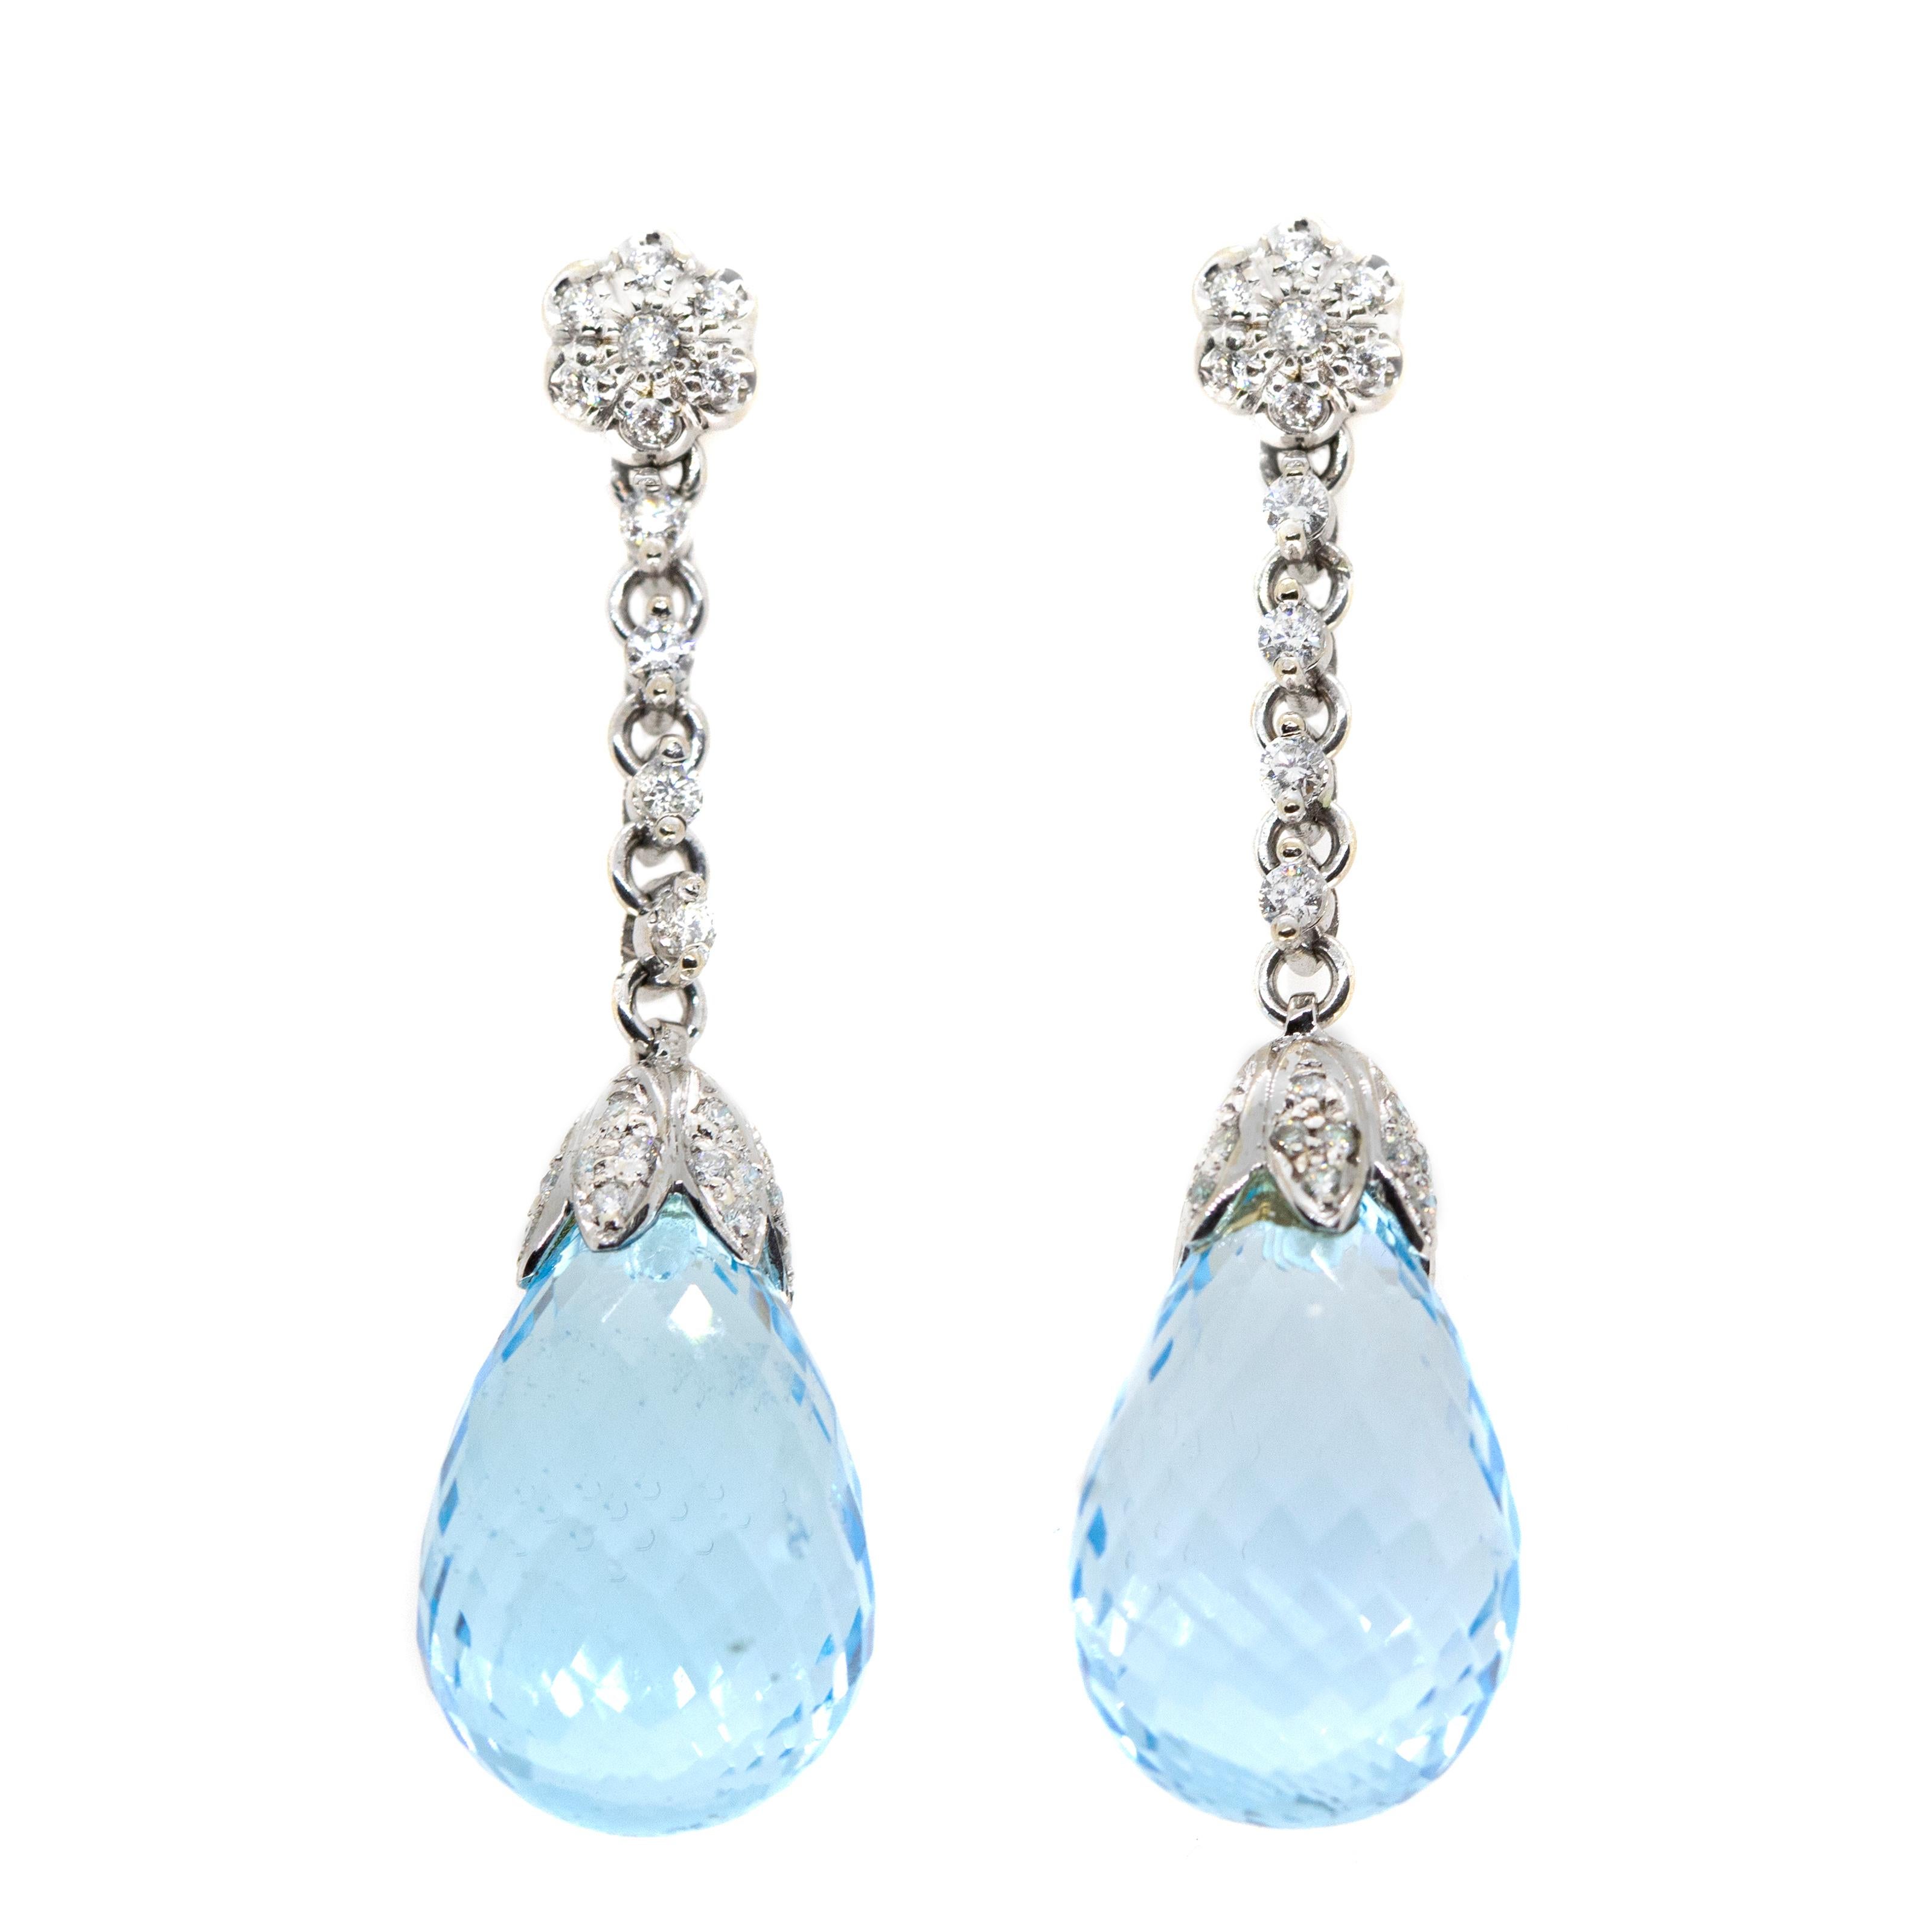 These delicate earrings, masterfully created by hand from 18-karat white gold each feature a stunning blue topaz and white diamonds, bezel- and pavé-set. The topaz total 45.50-carats.

This is a delightful pair of post-back earrings; they measure